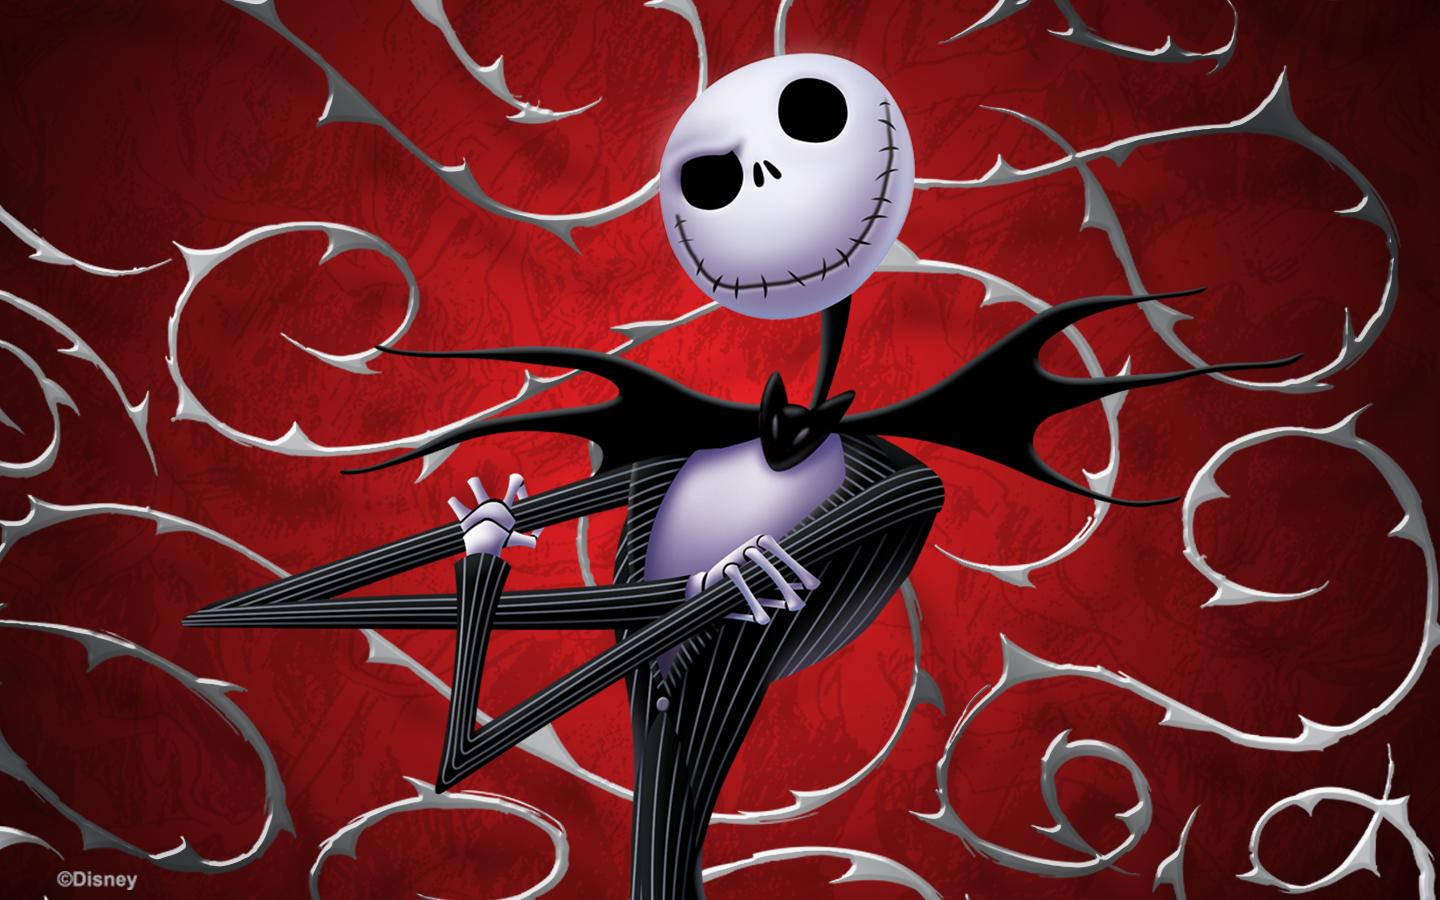 Thorny Jack From The Nightmare Before Christmas